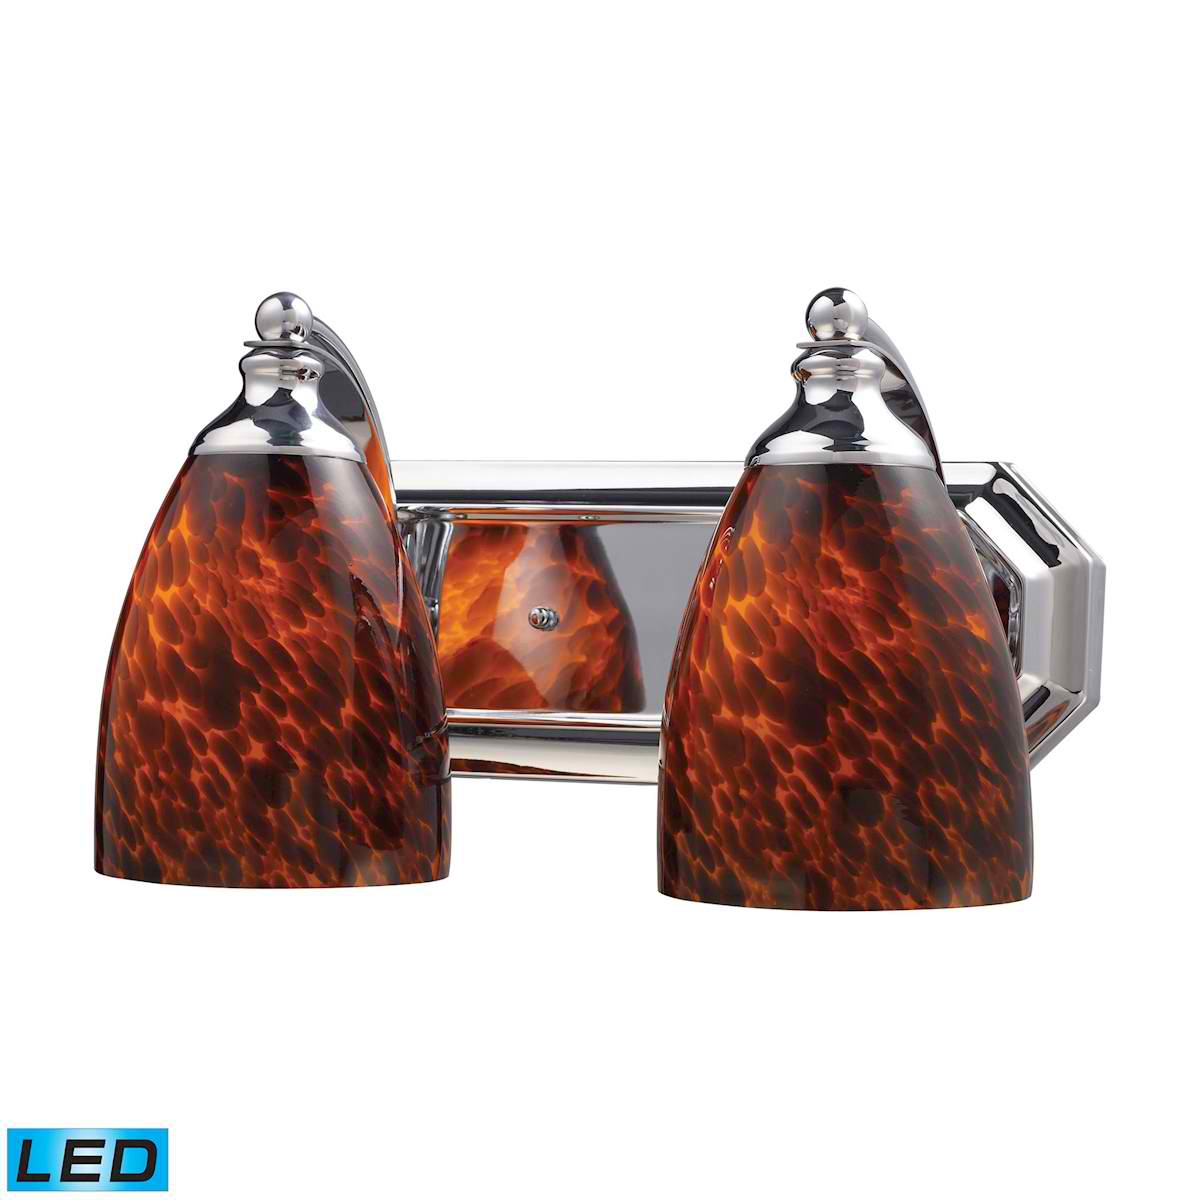 2 Light Vanity in Polished Chrome and Espresso Glass - LED, 800 Lumens (1600 Lumens Total) with Full Scale